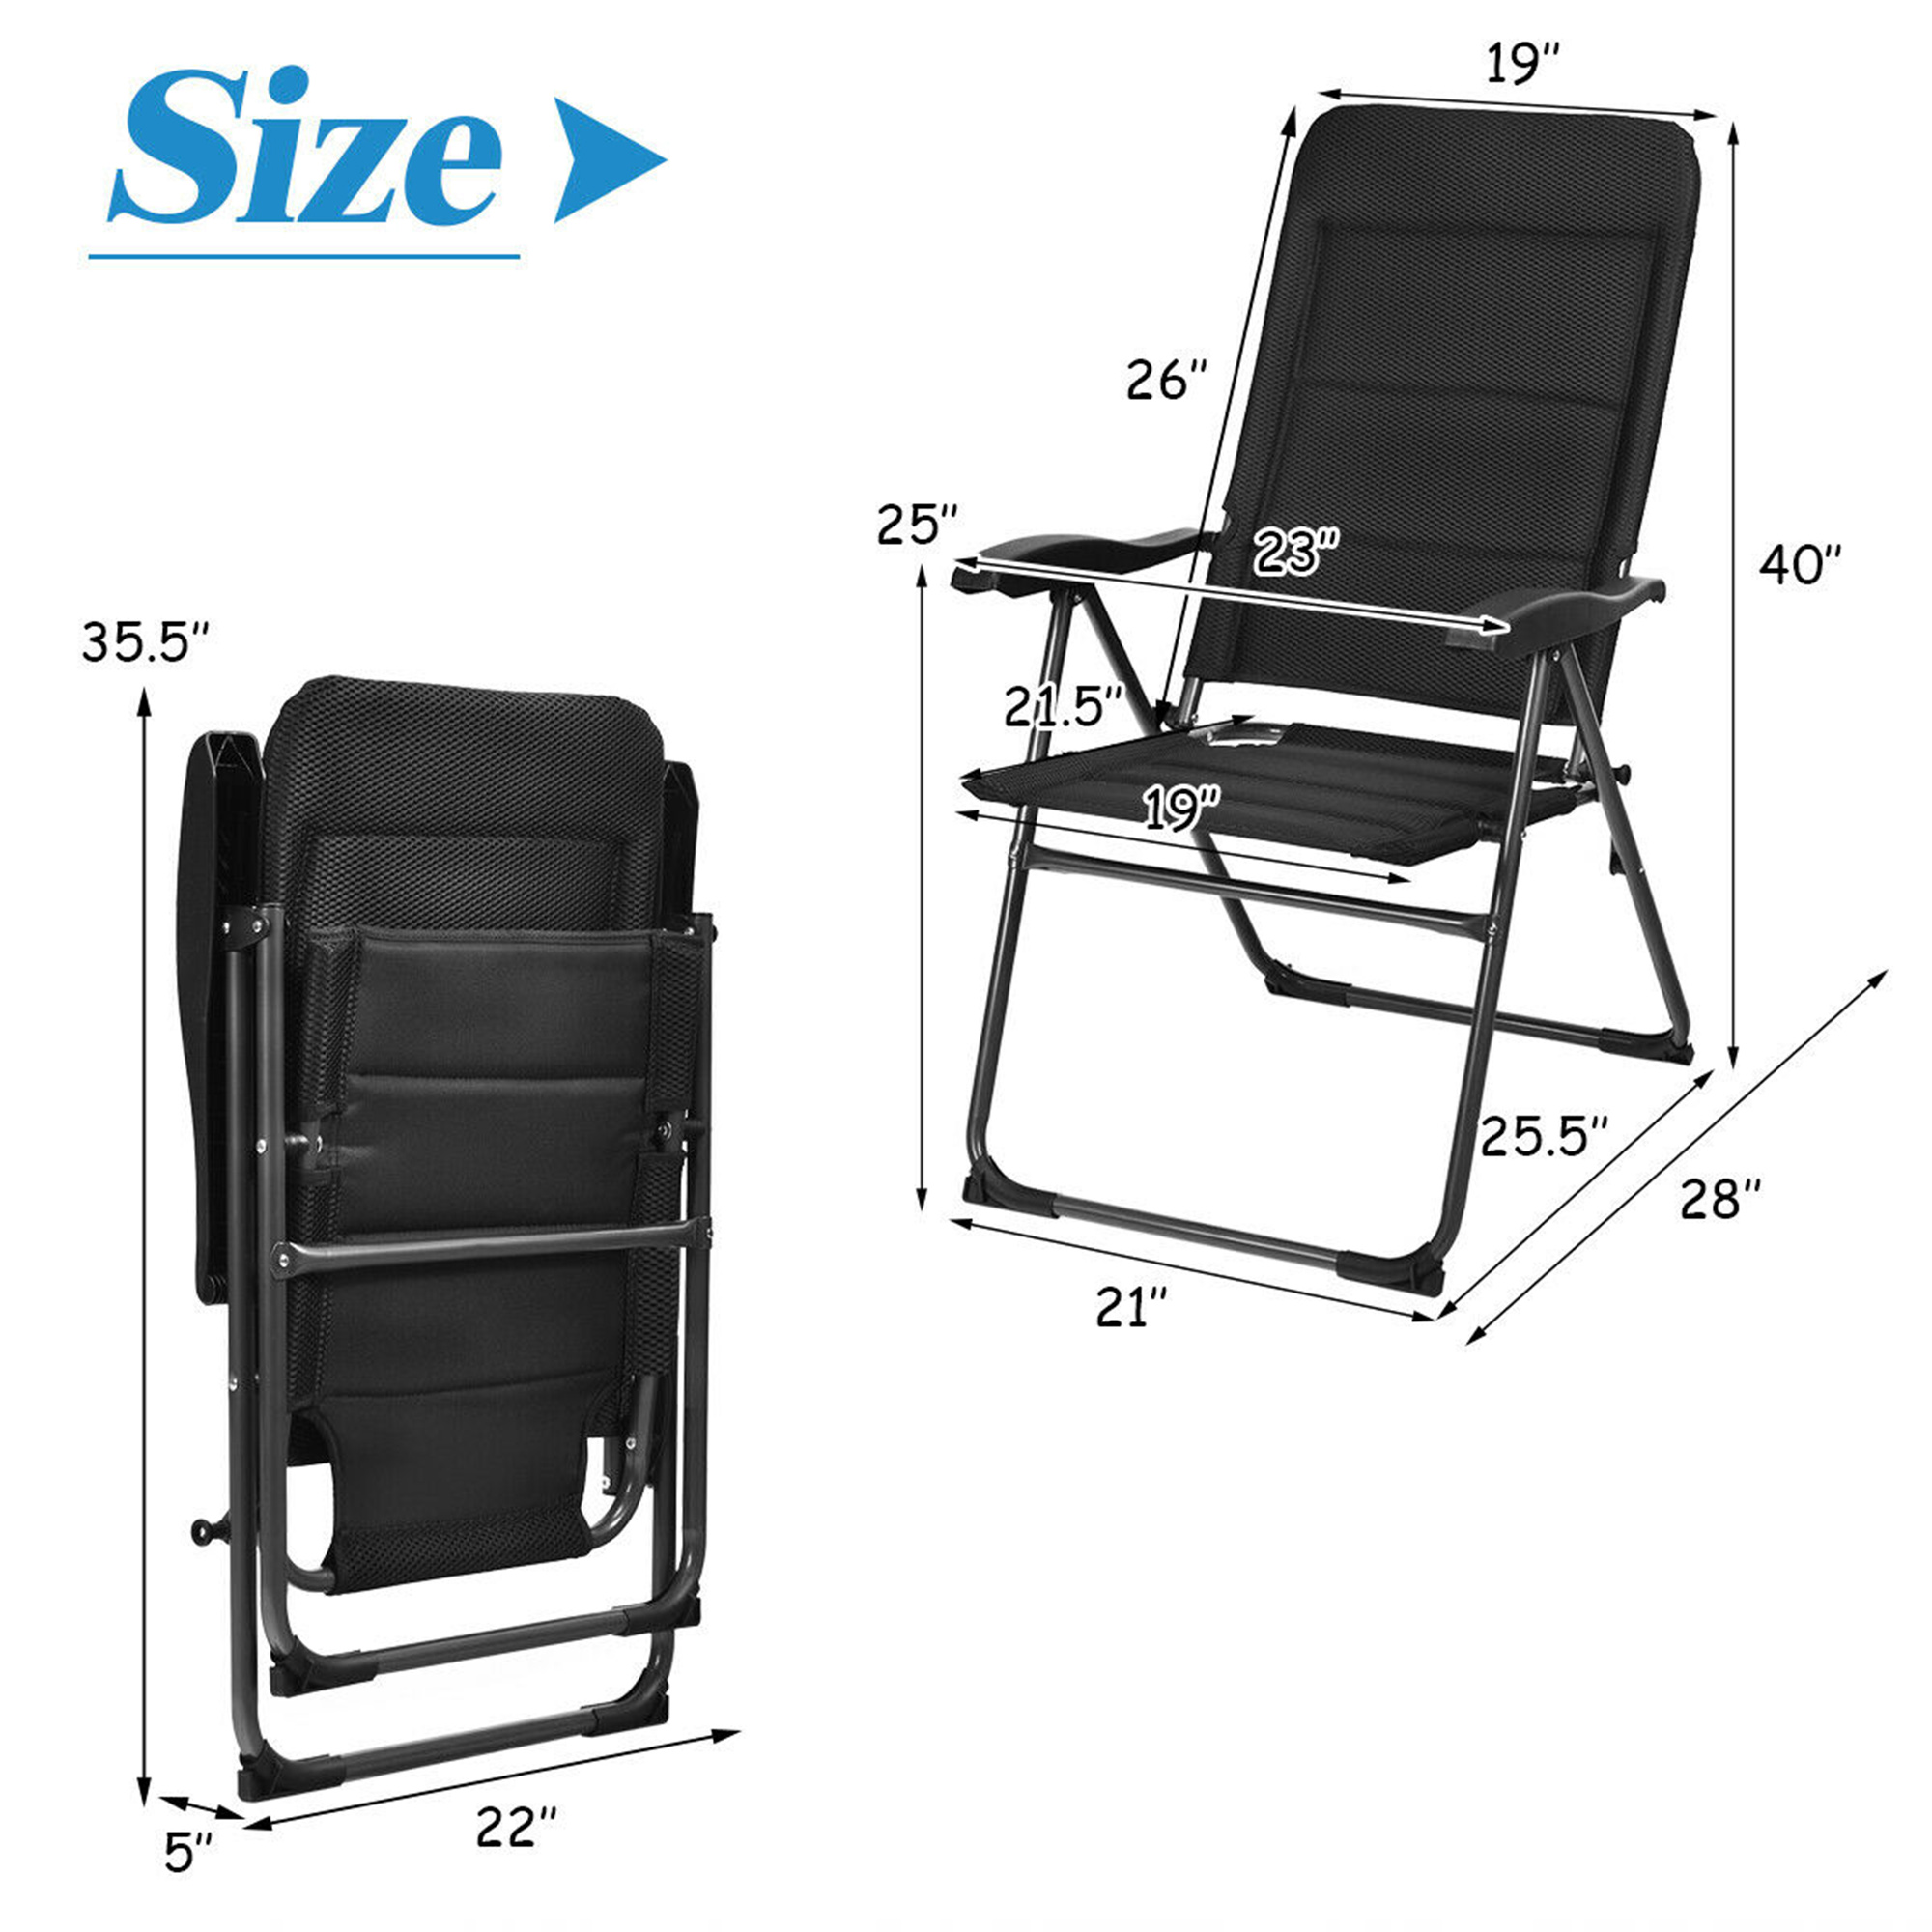 Gymax 2PCS Patio Folding Chairs Back Adjustable Reclining Padded Garden Furniture - image 2 of 10